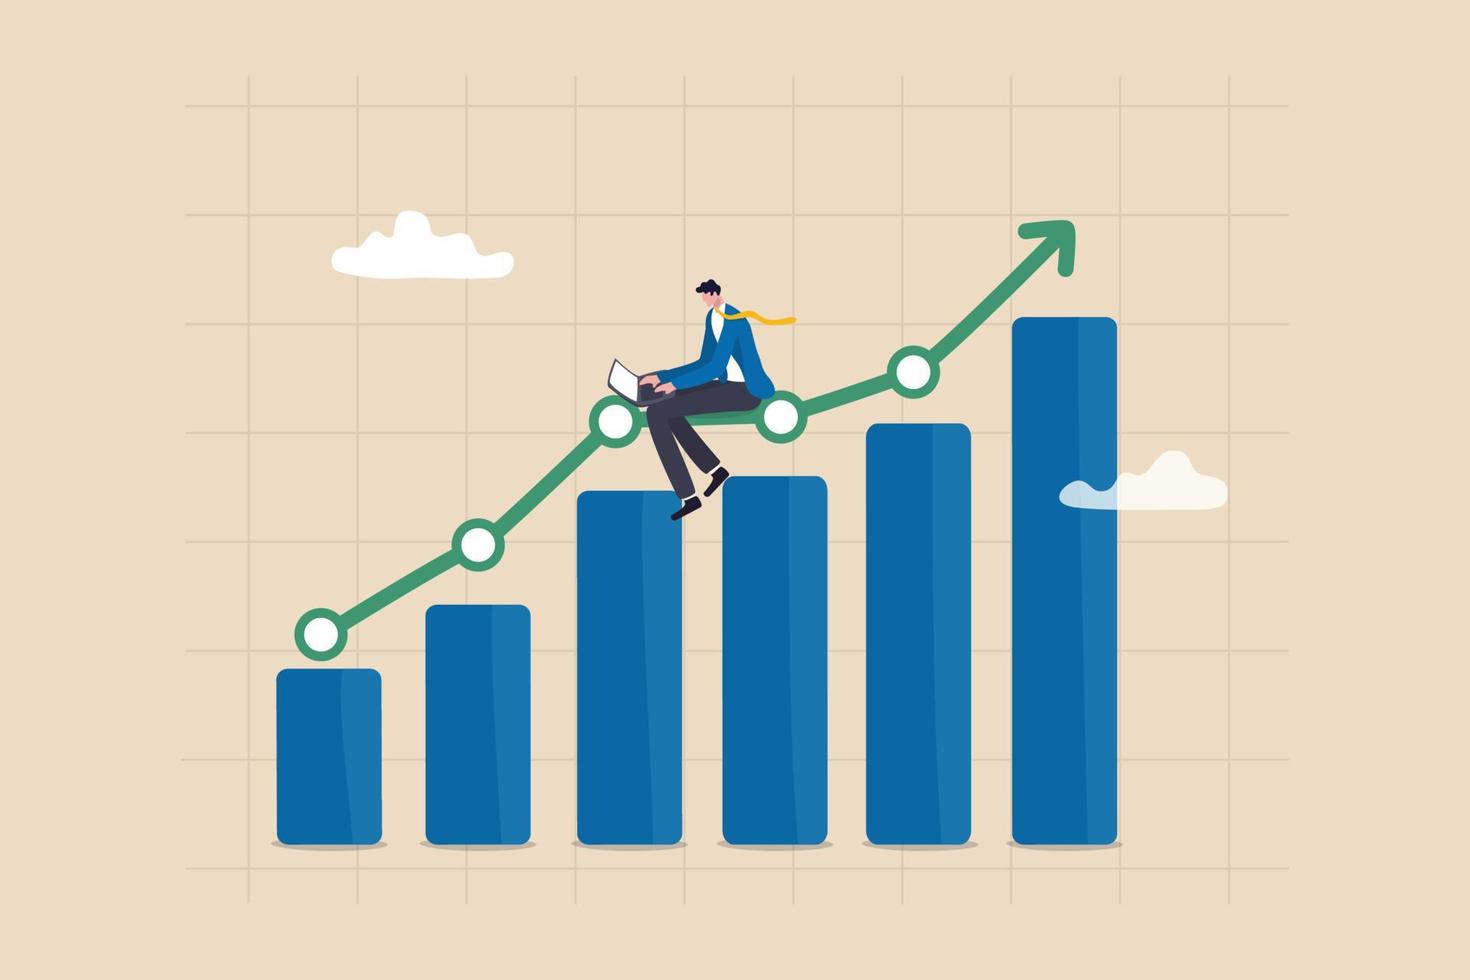 Work improvement, increase performance or growing business, make profit or earn more income, efficiency or productivity concept, businessman working with laptop on improvement data chart and graph. vector